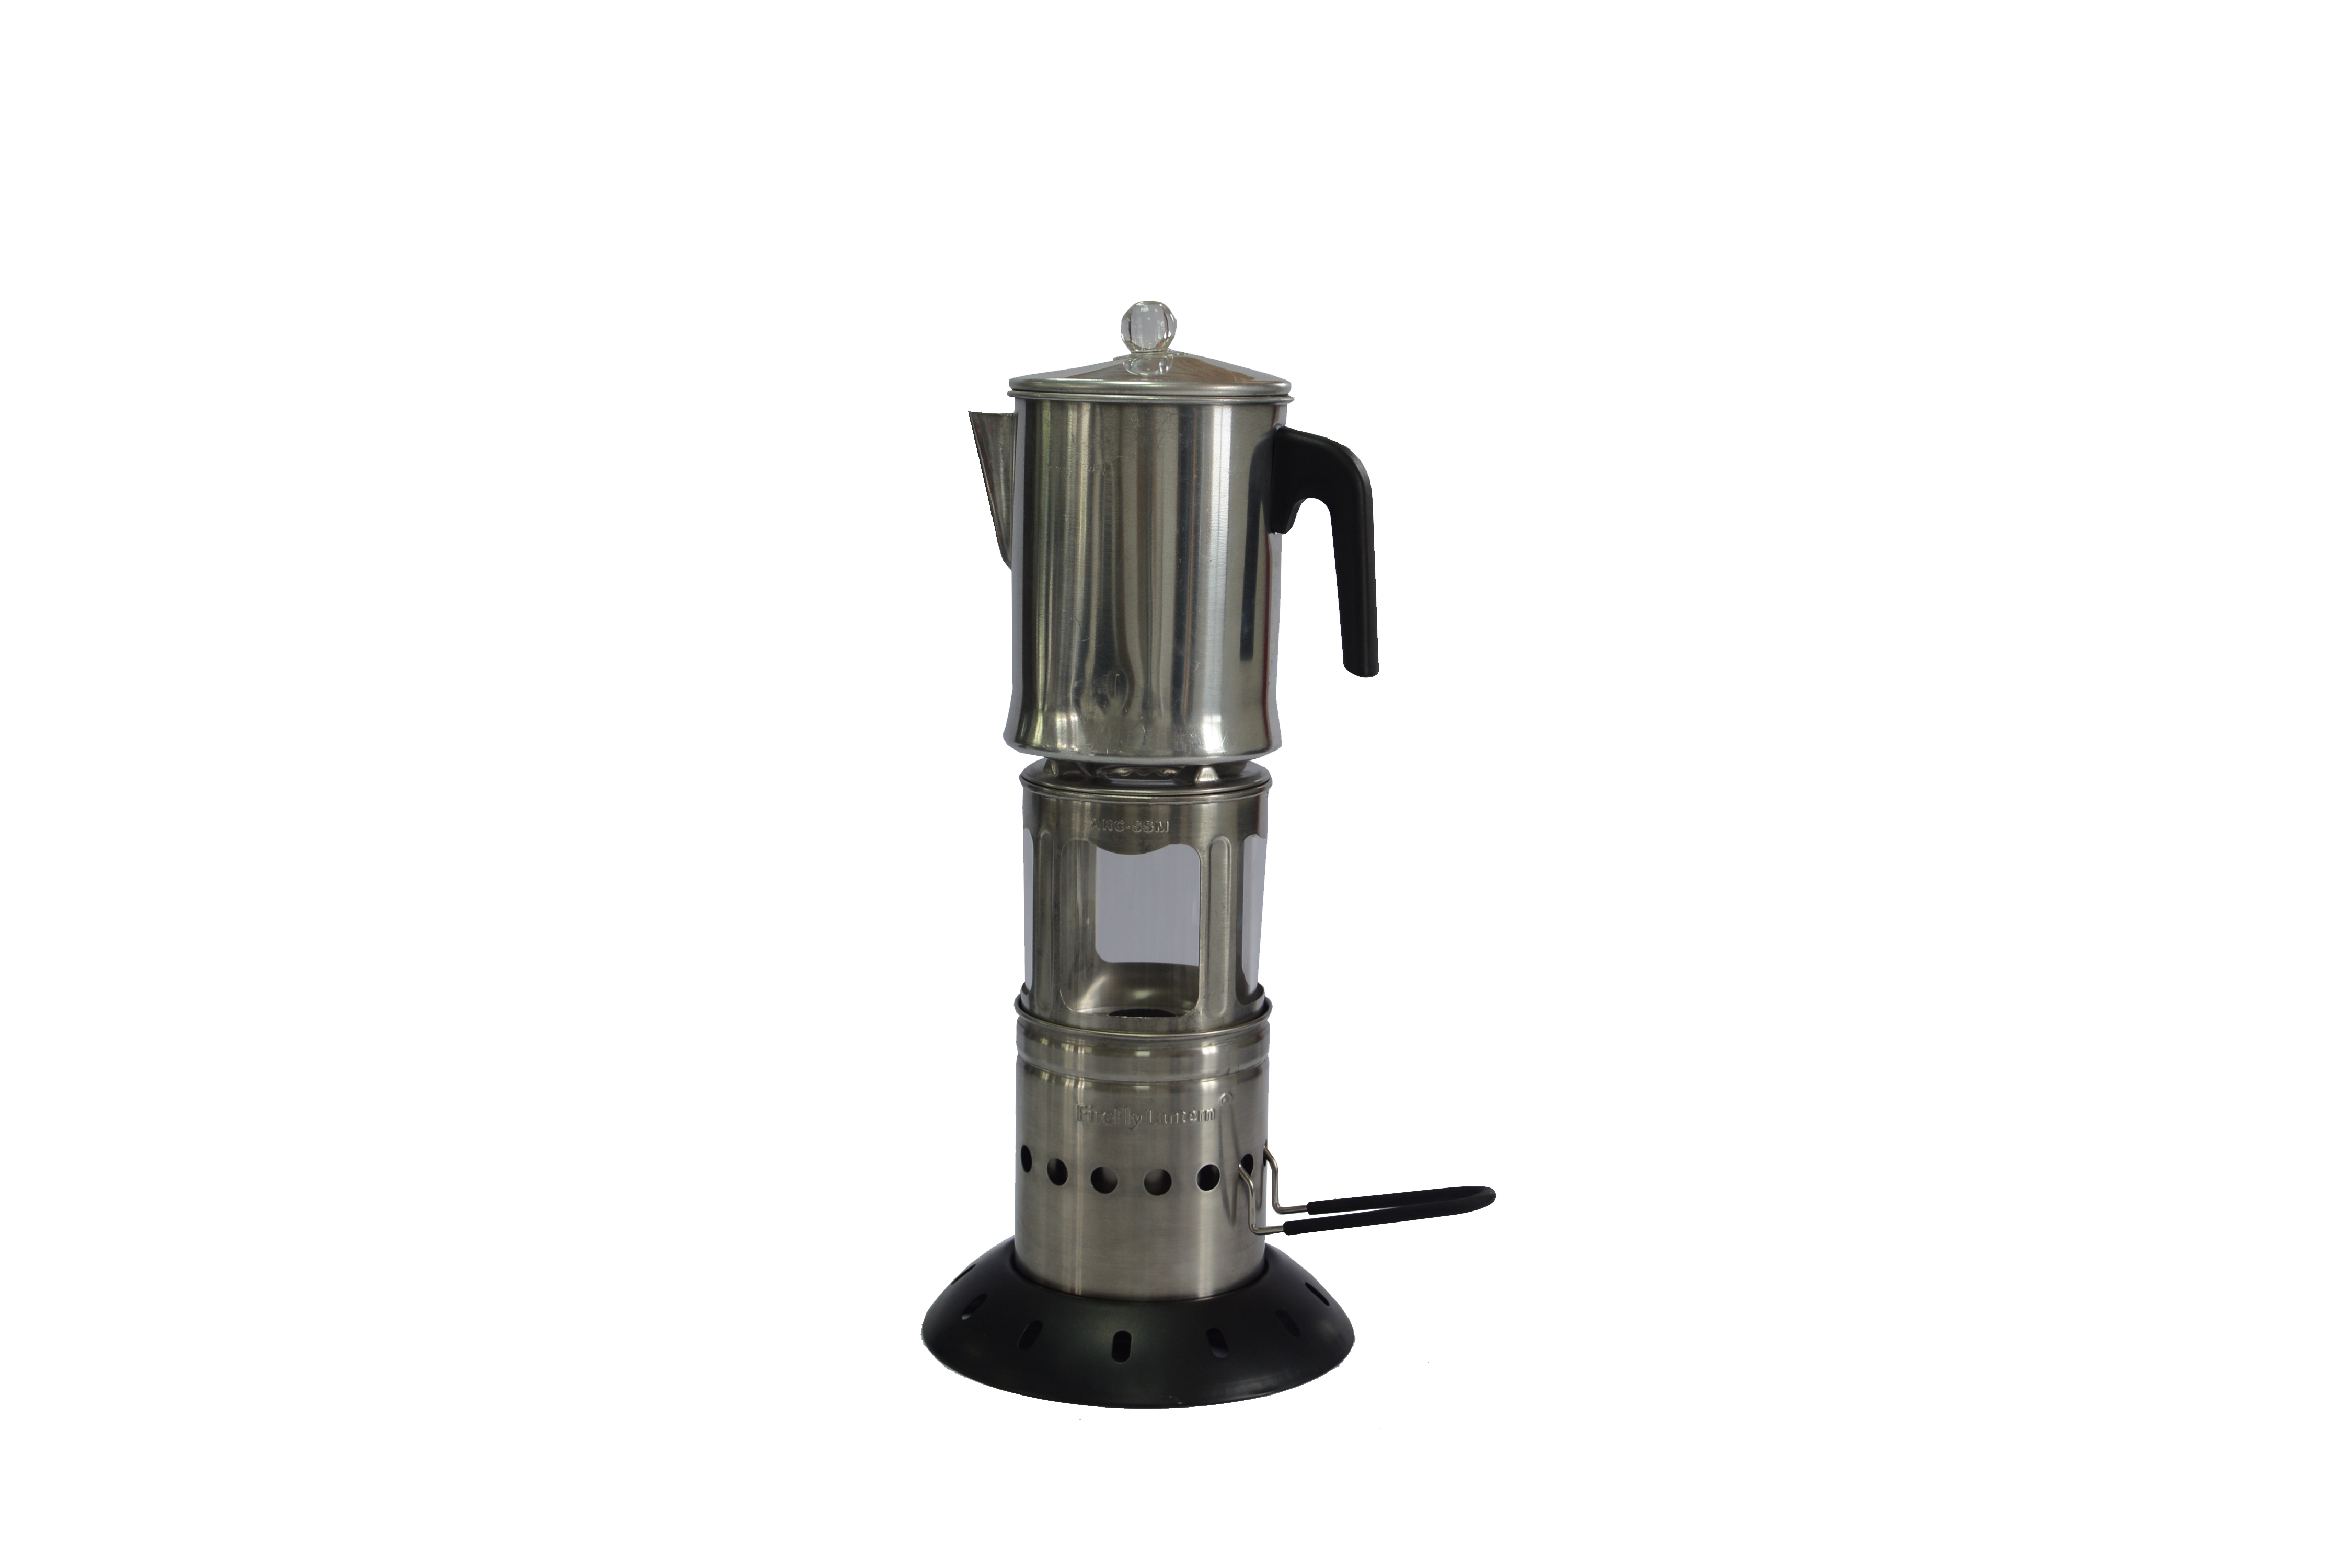 The Firefly Lantern with coffee pot